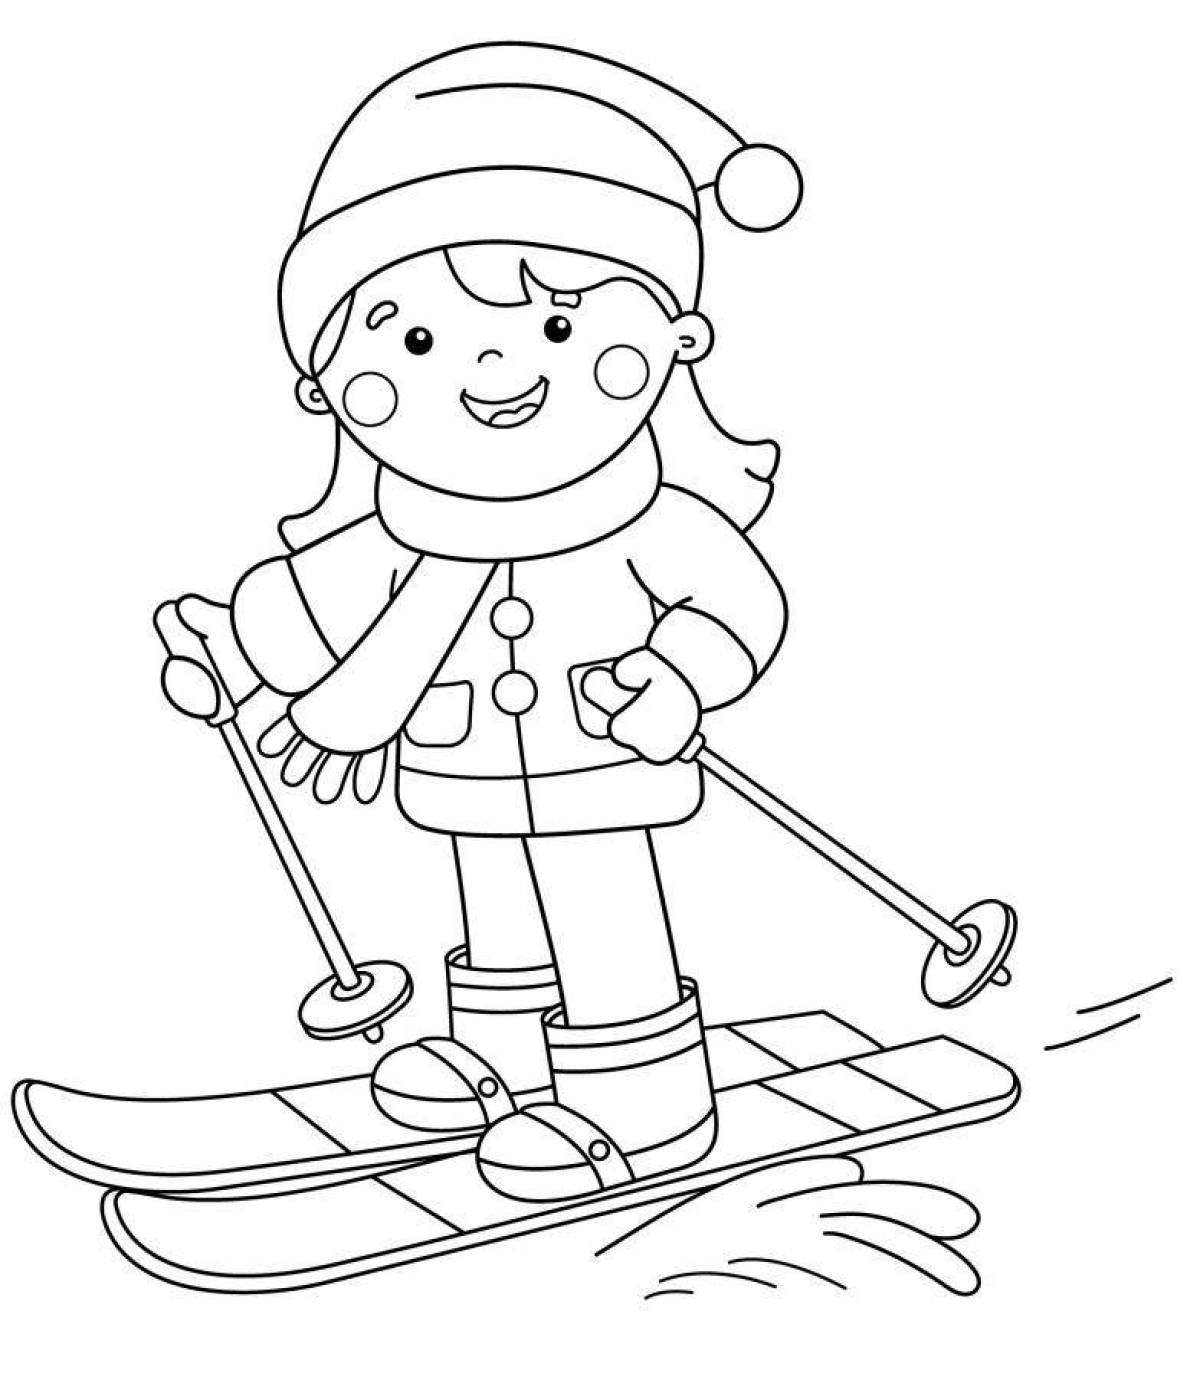 Glamorous winter sports coloring book